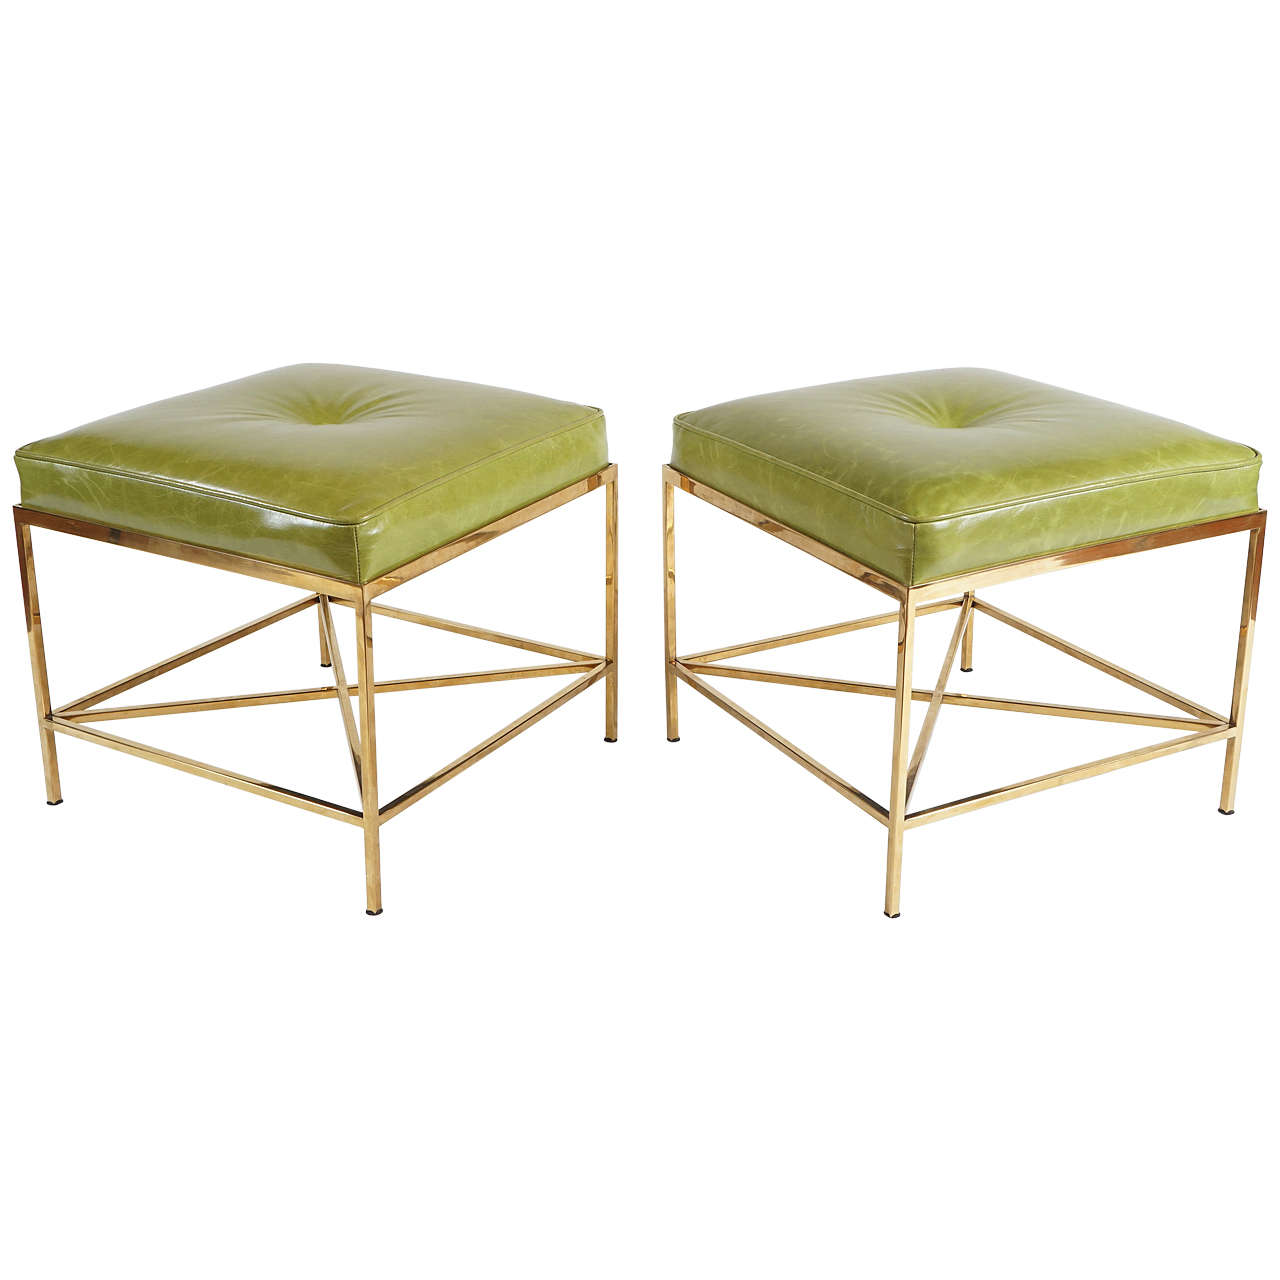 Vintage Brass Paul McCobb Style Leather Upholstered Stools